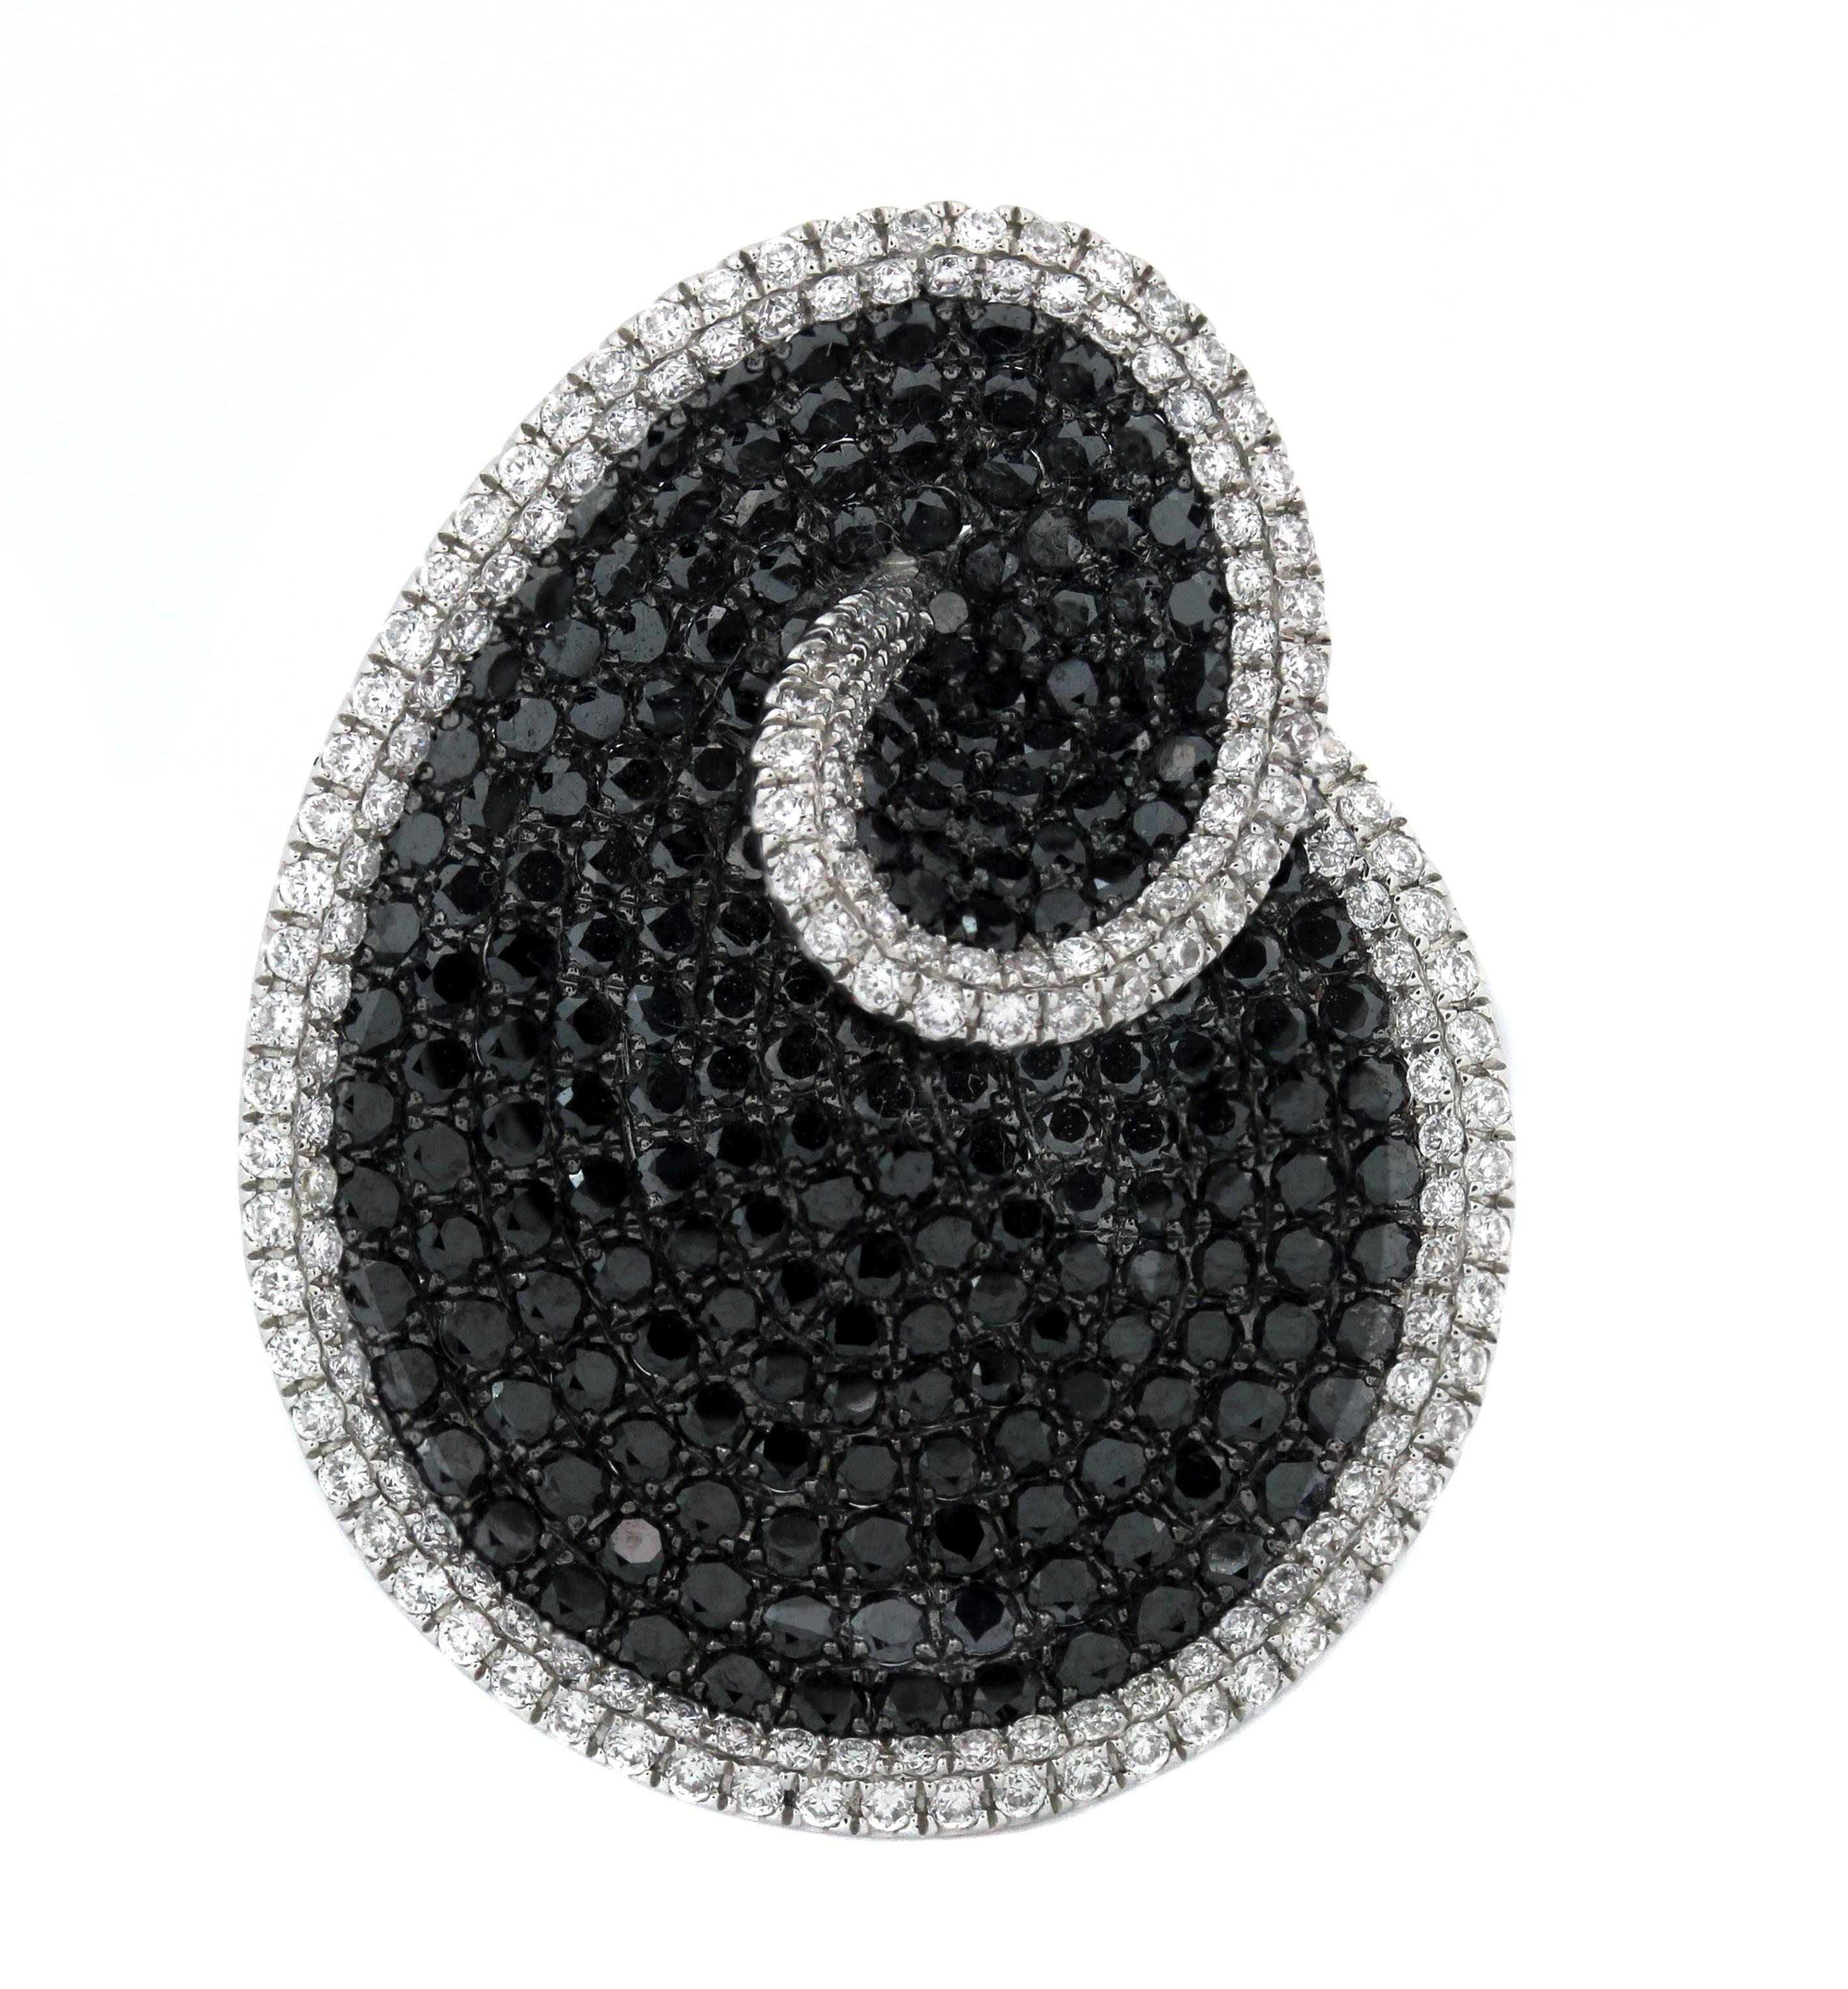 18K White Gold Ring with Black and White Diamonds

Black diamonds make up center of ring with white diamonds surrounding along with spiral design.

Apprx. 3.00ct. Black diamonds
Apprx. 1.30ct. White Diamonds

Face dimensions: 1.2 inch length x 0.9